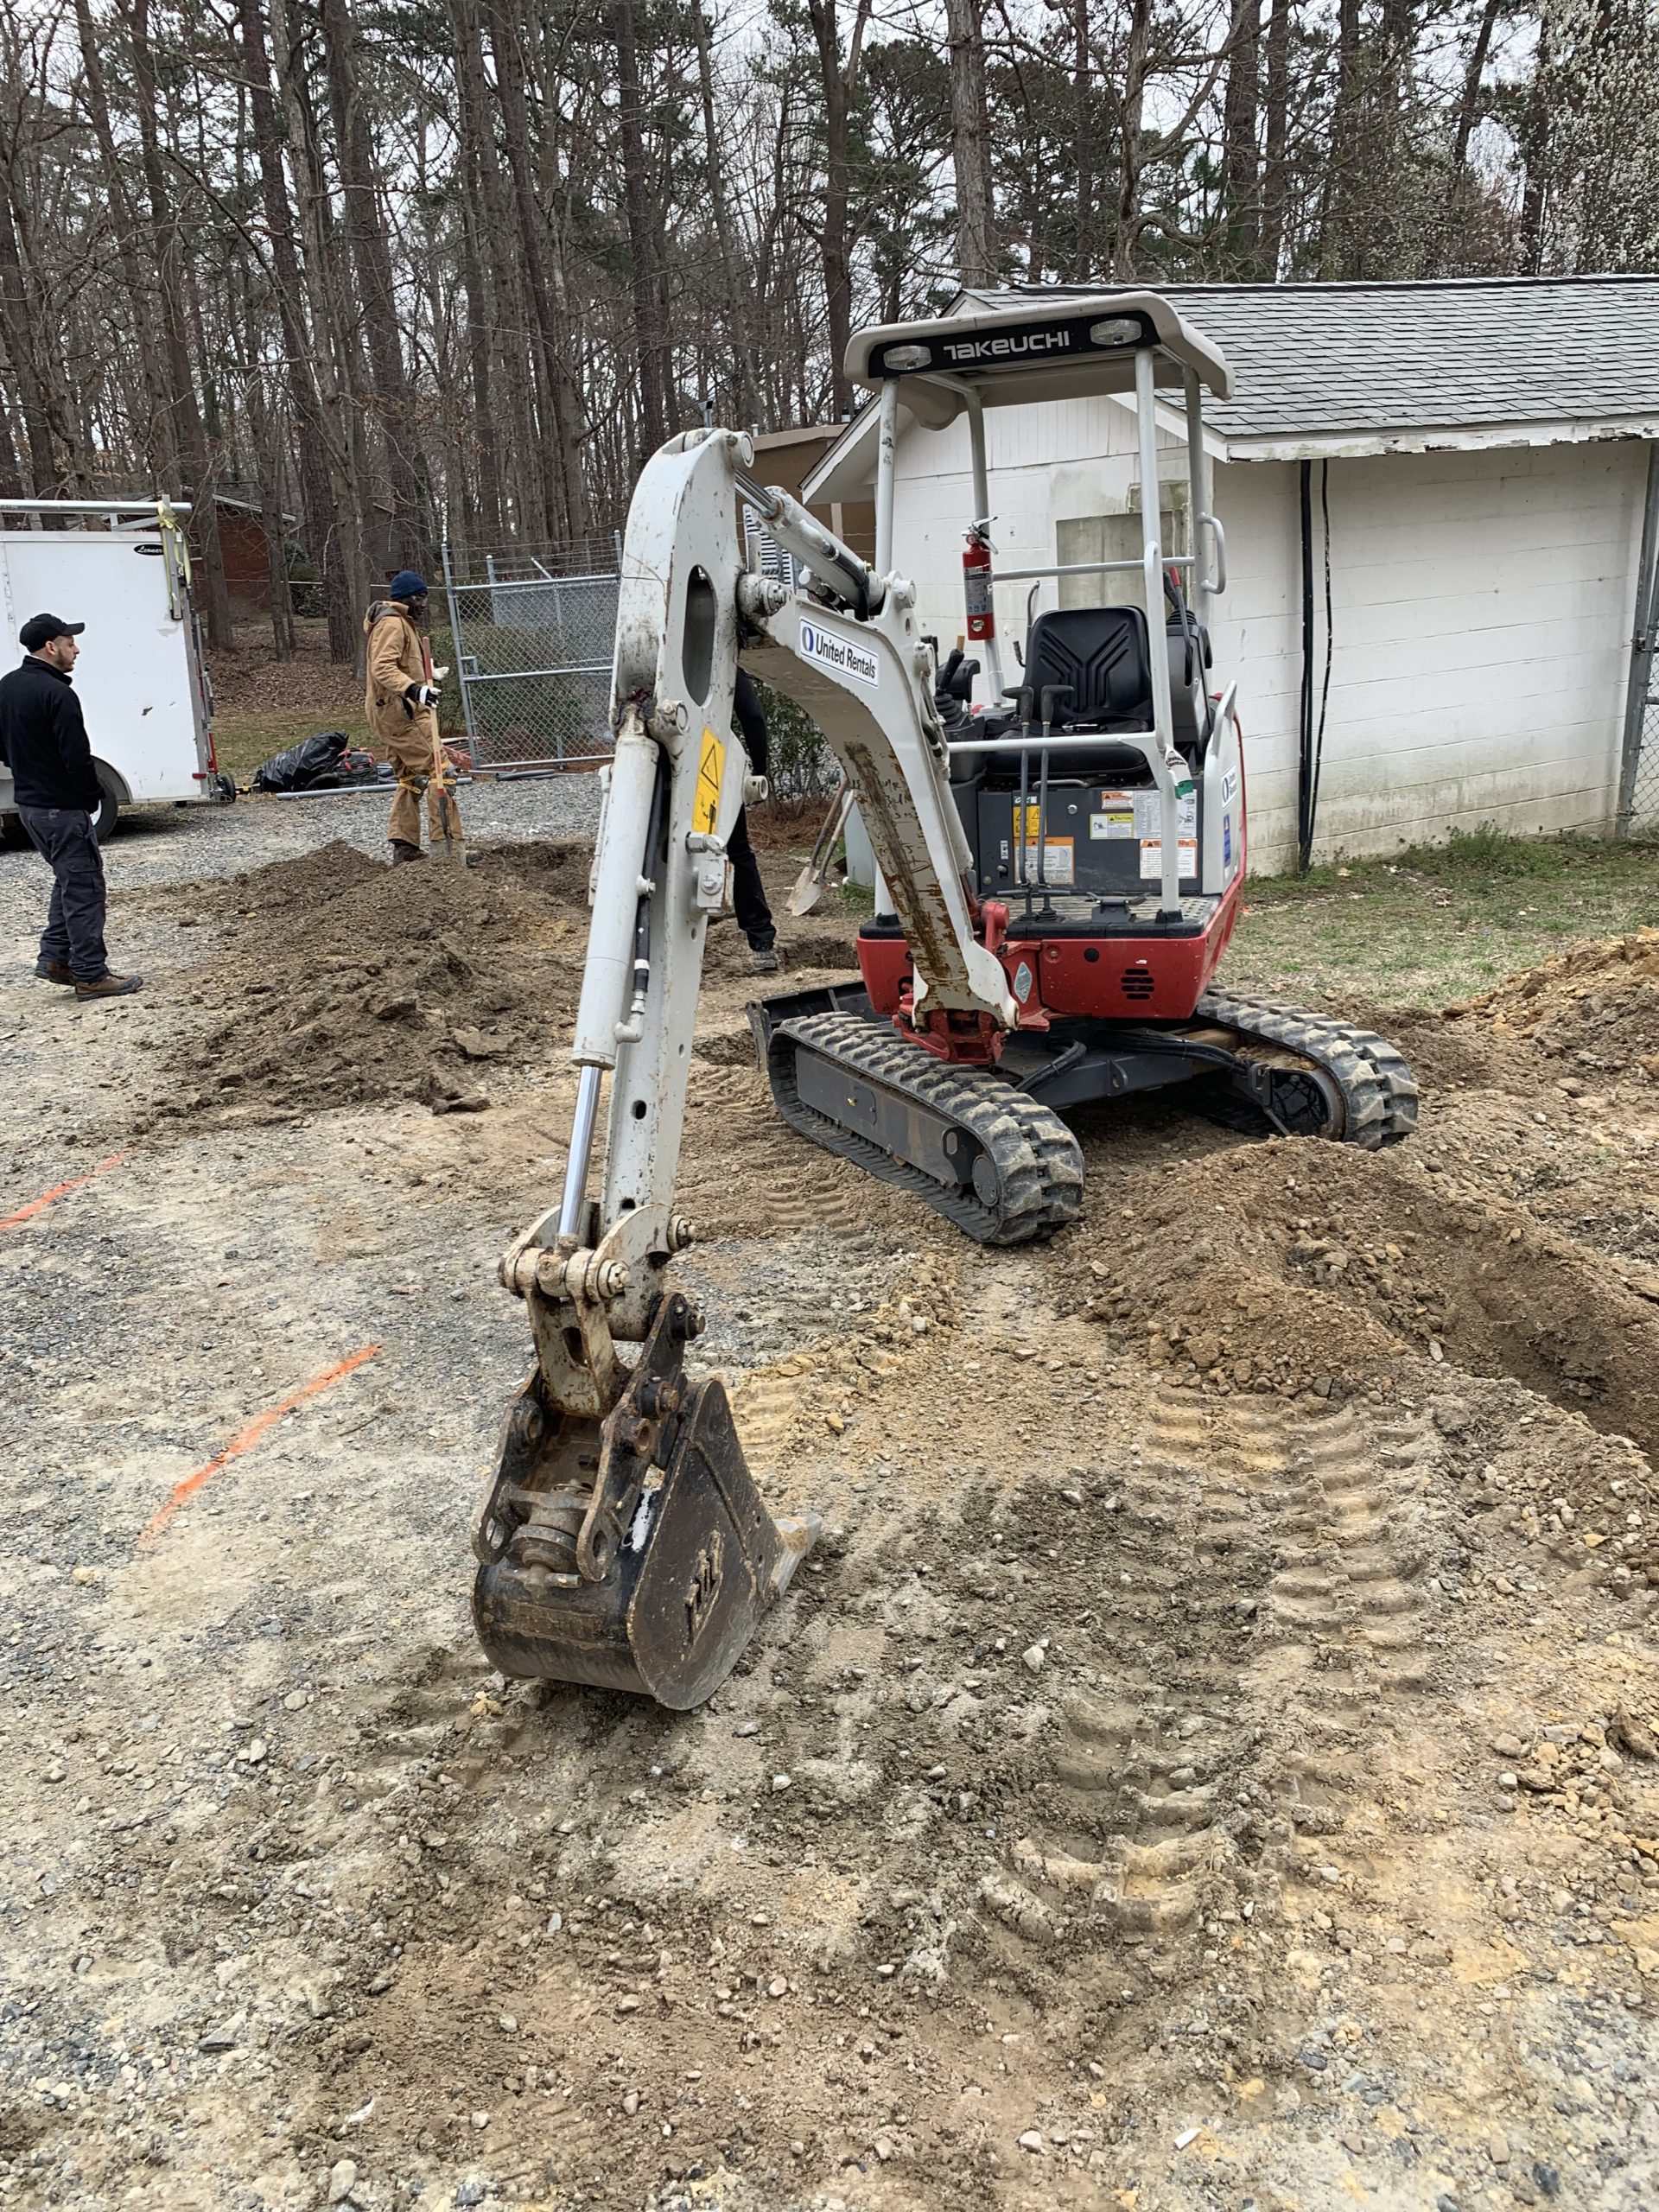 PROJECTS RF USA. Image 3.  Excavator used for trench fiber optic cable (06/03/2019)